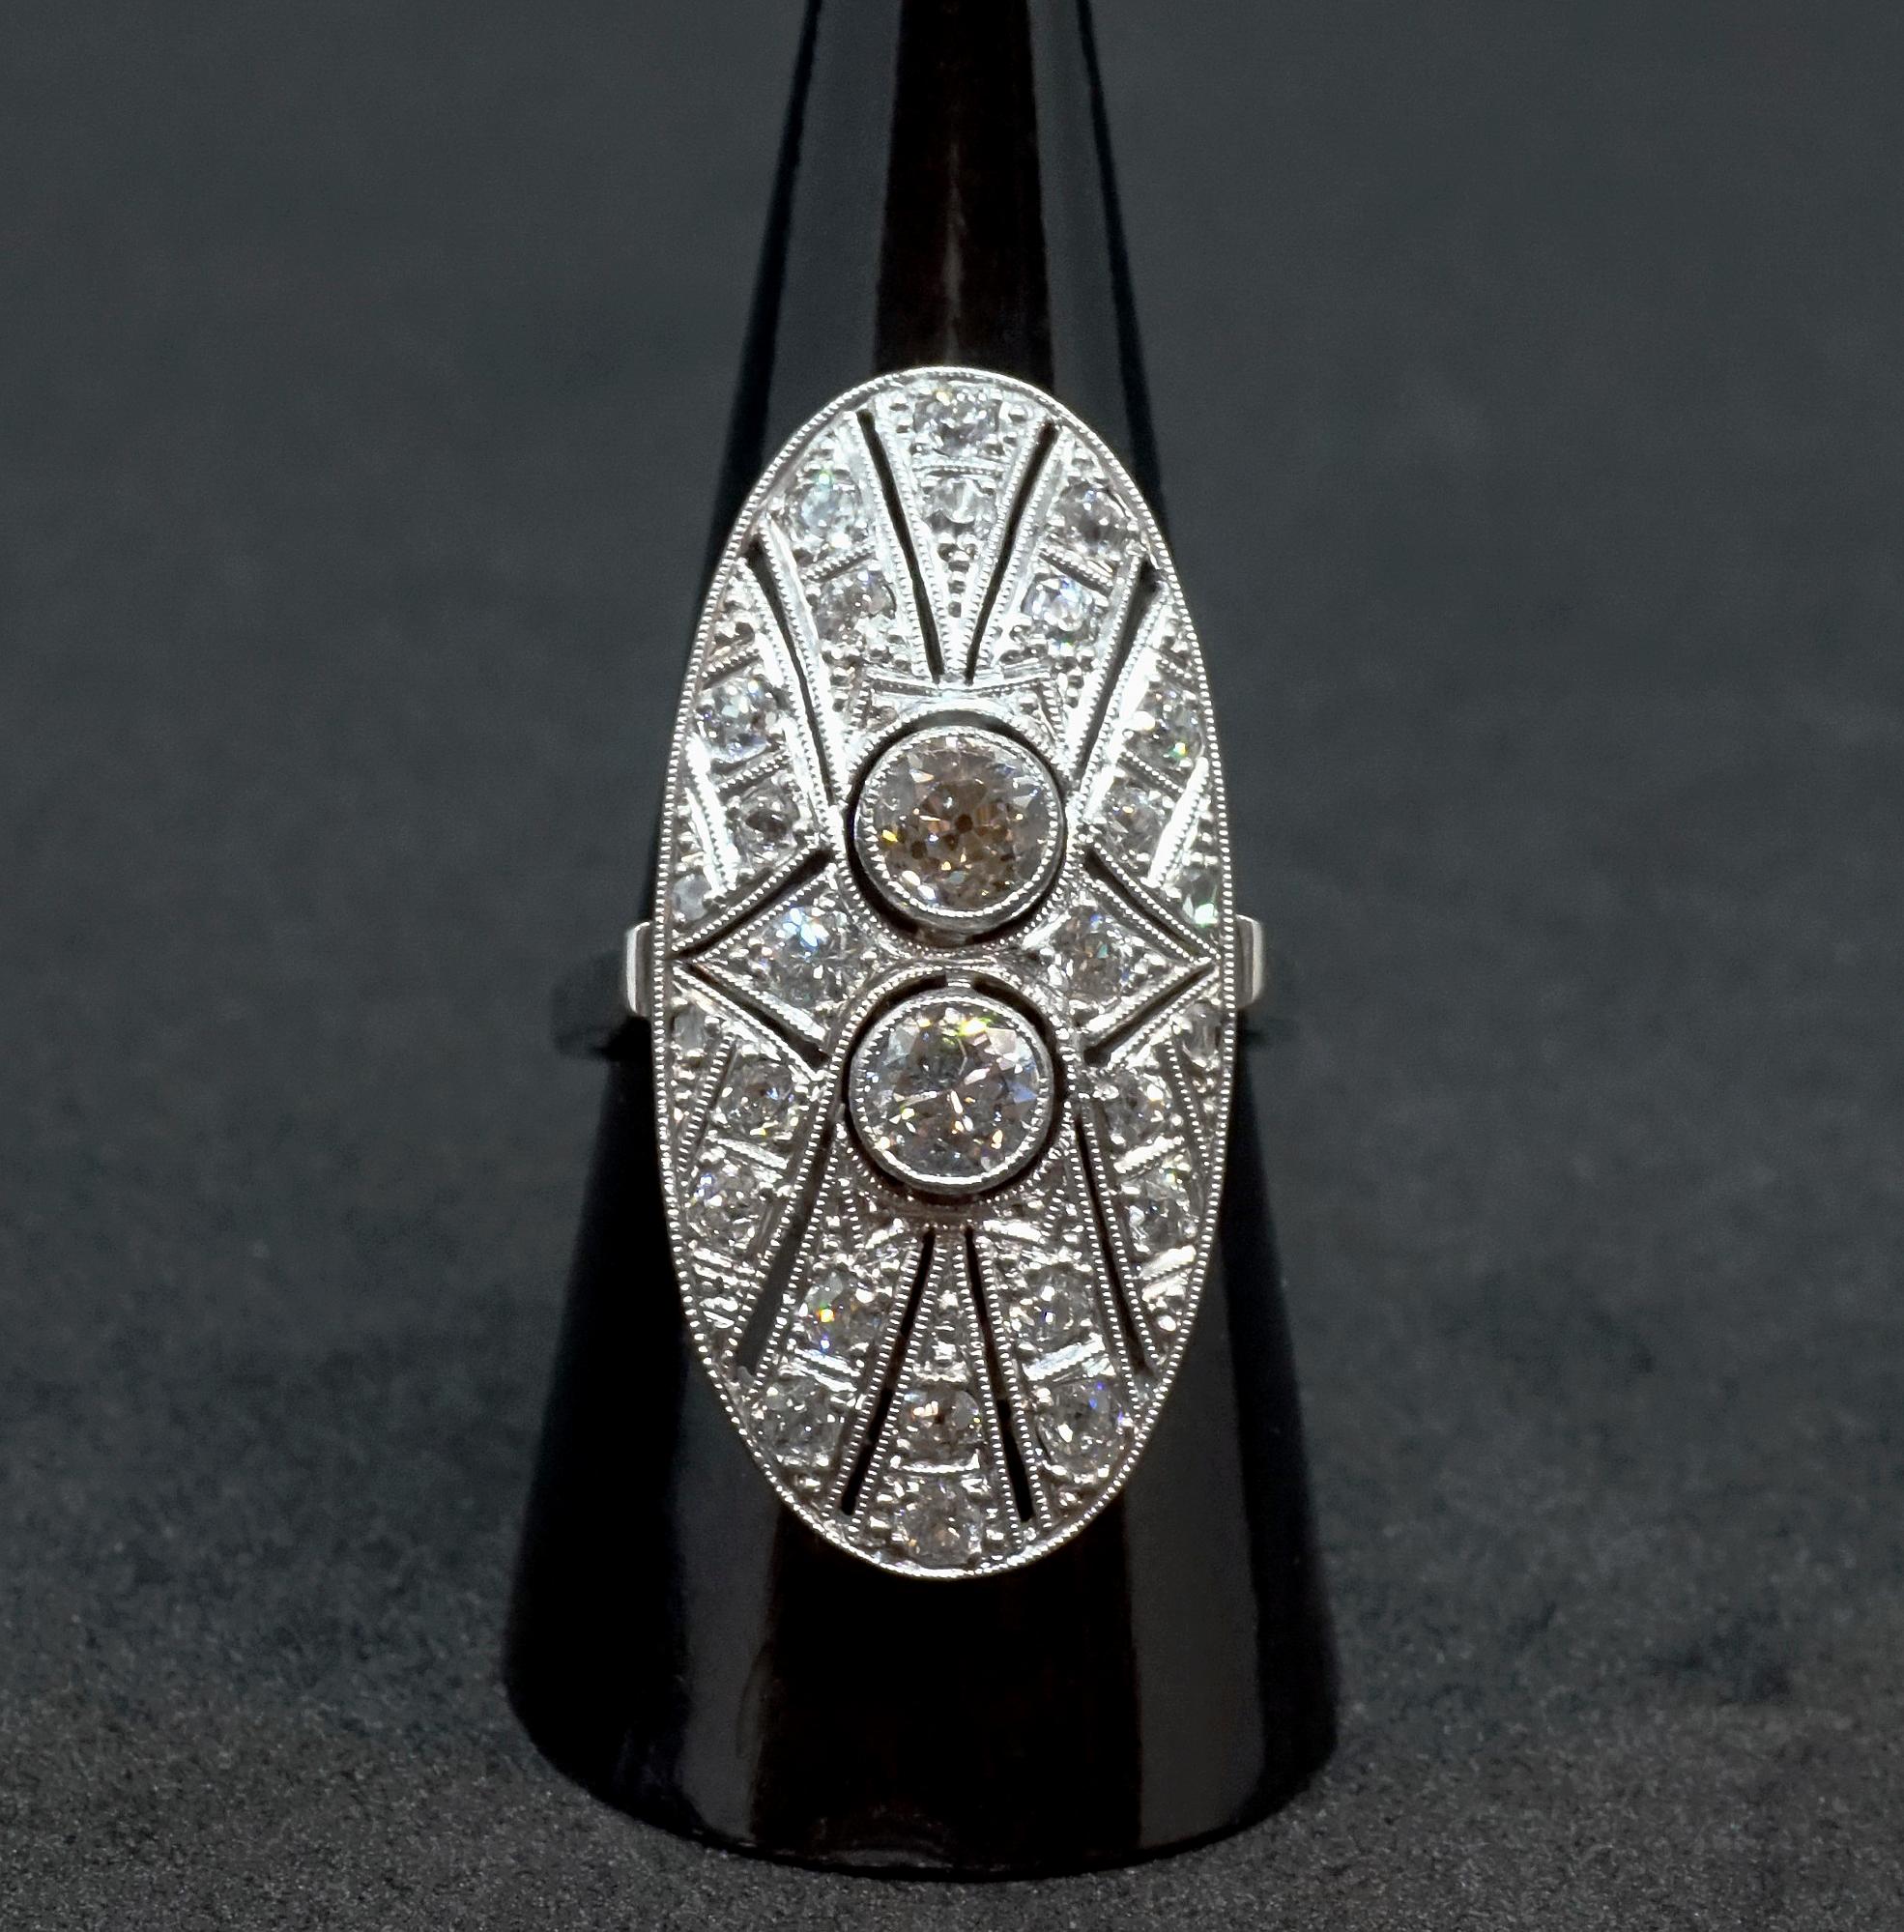 Delicate antique navette-shaped old brilliant-cut diamond ring, with two centered old cut diamonds estimated 0.3 carat each set in a row, surounded by further small diamonds set in radial rows in a millegrain openwork collet, all diamonds together